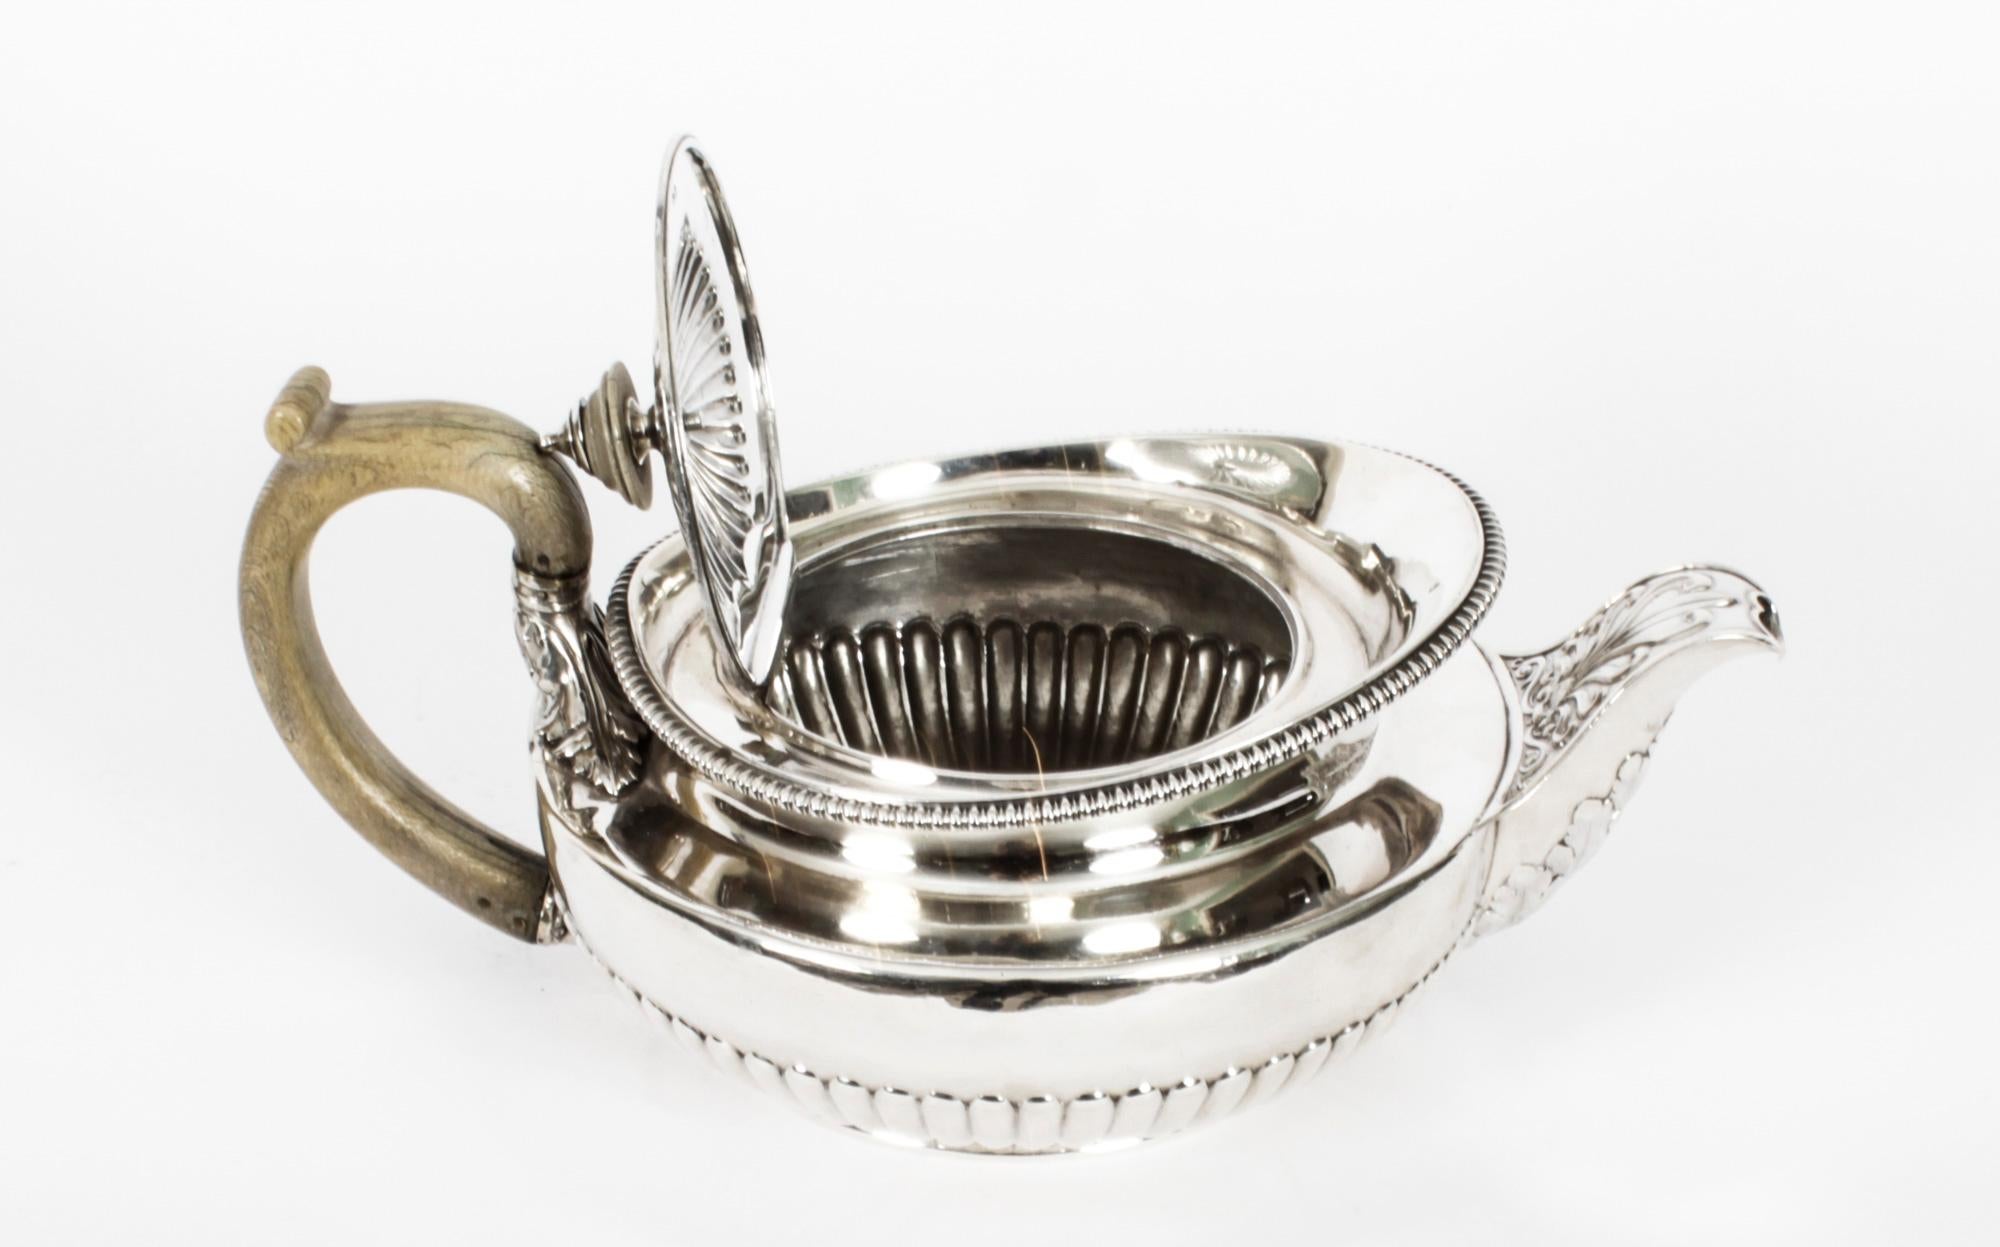 English Antique Rare Georgian Sterling Silver Teapot by Paul Storr 1817, 19th Century For Sale